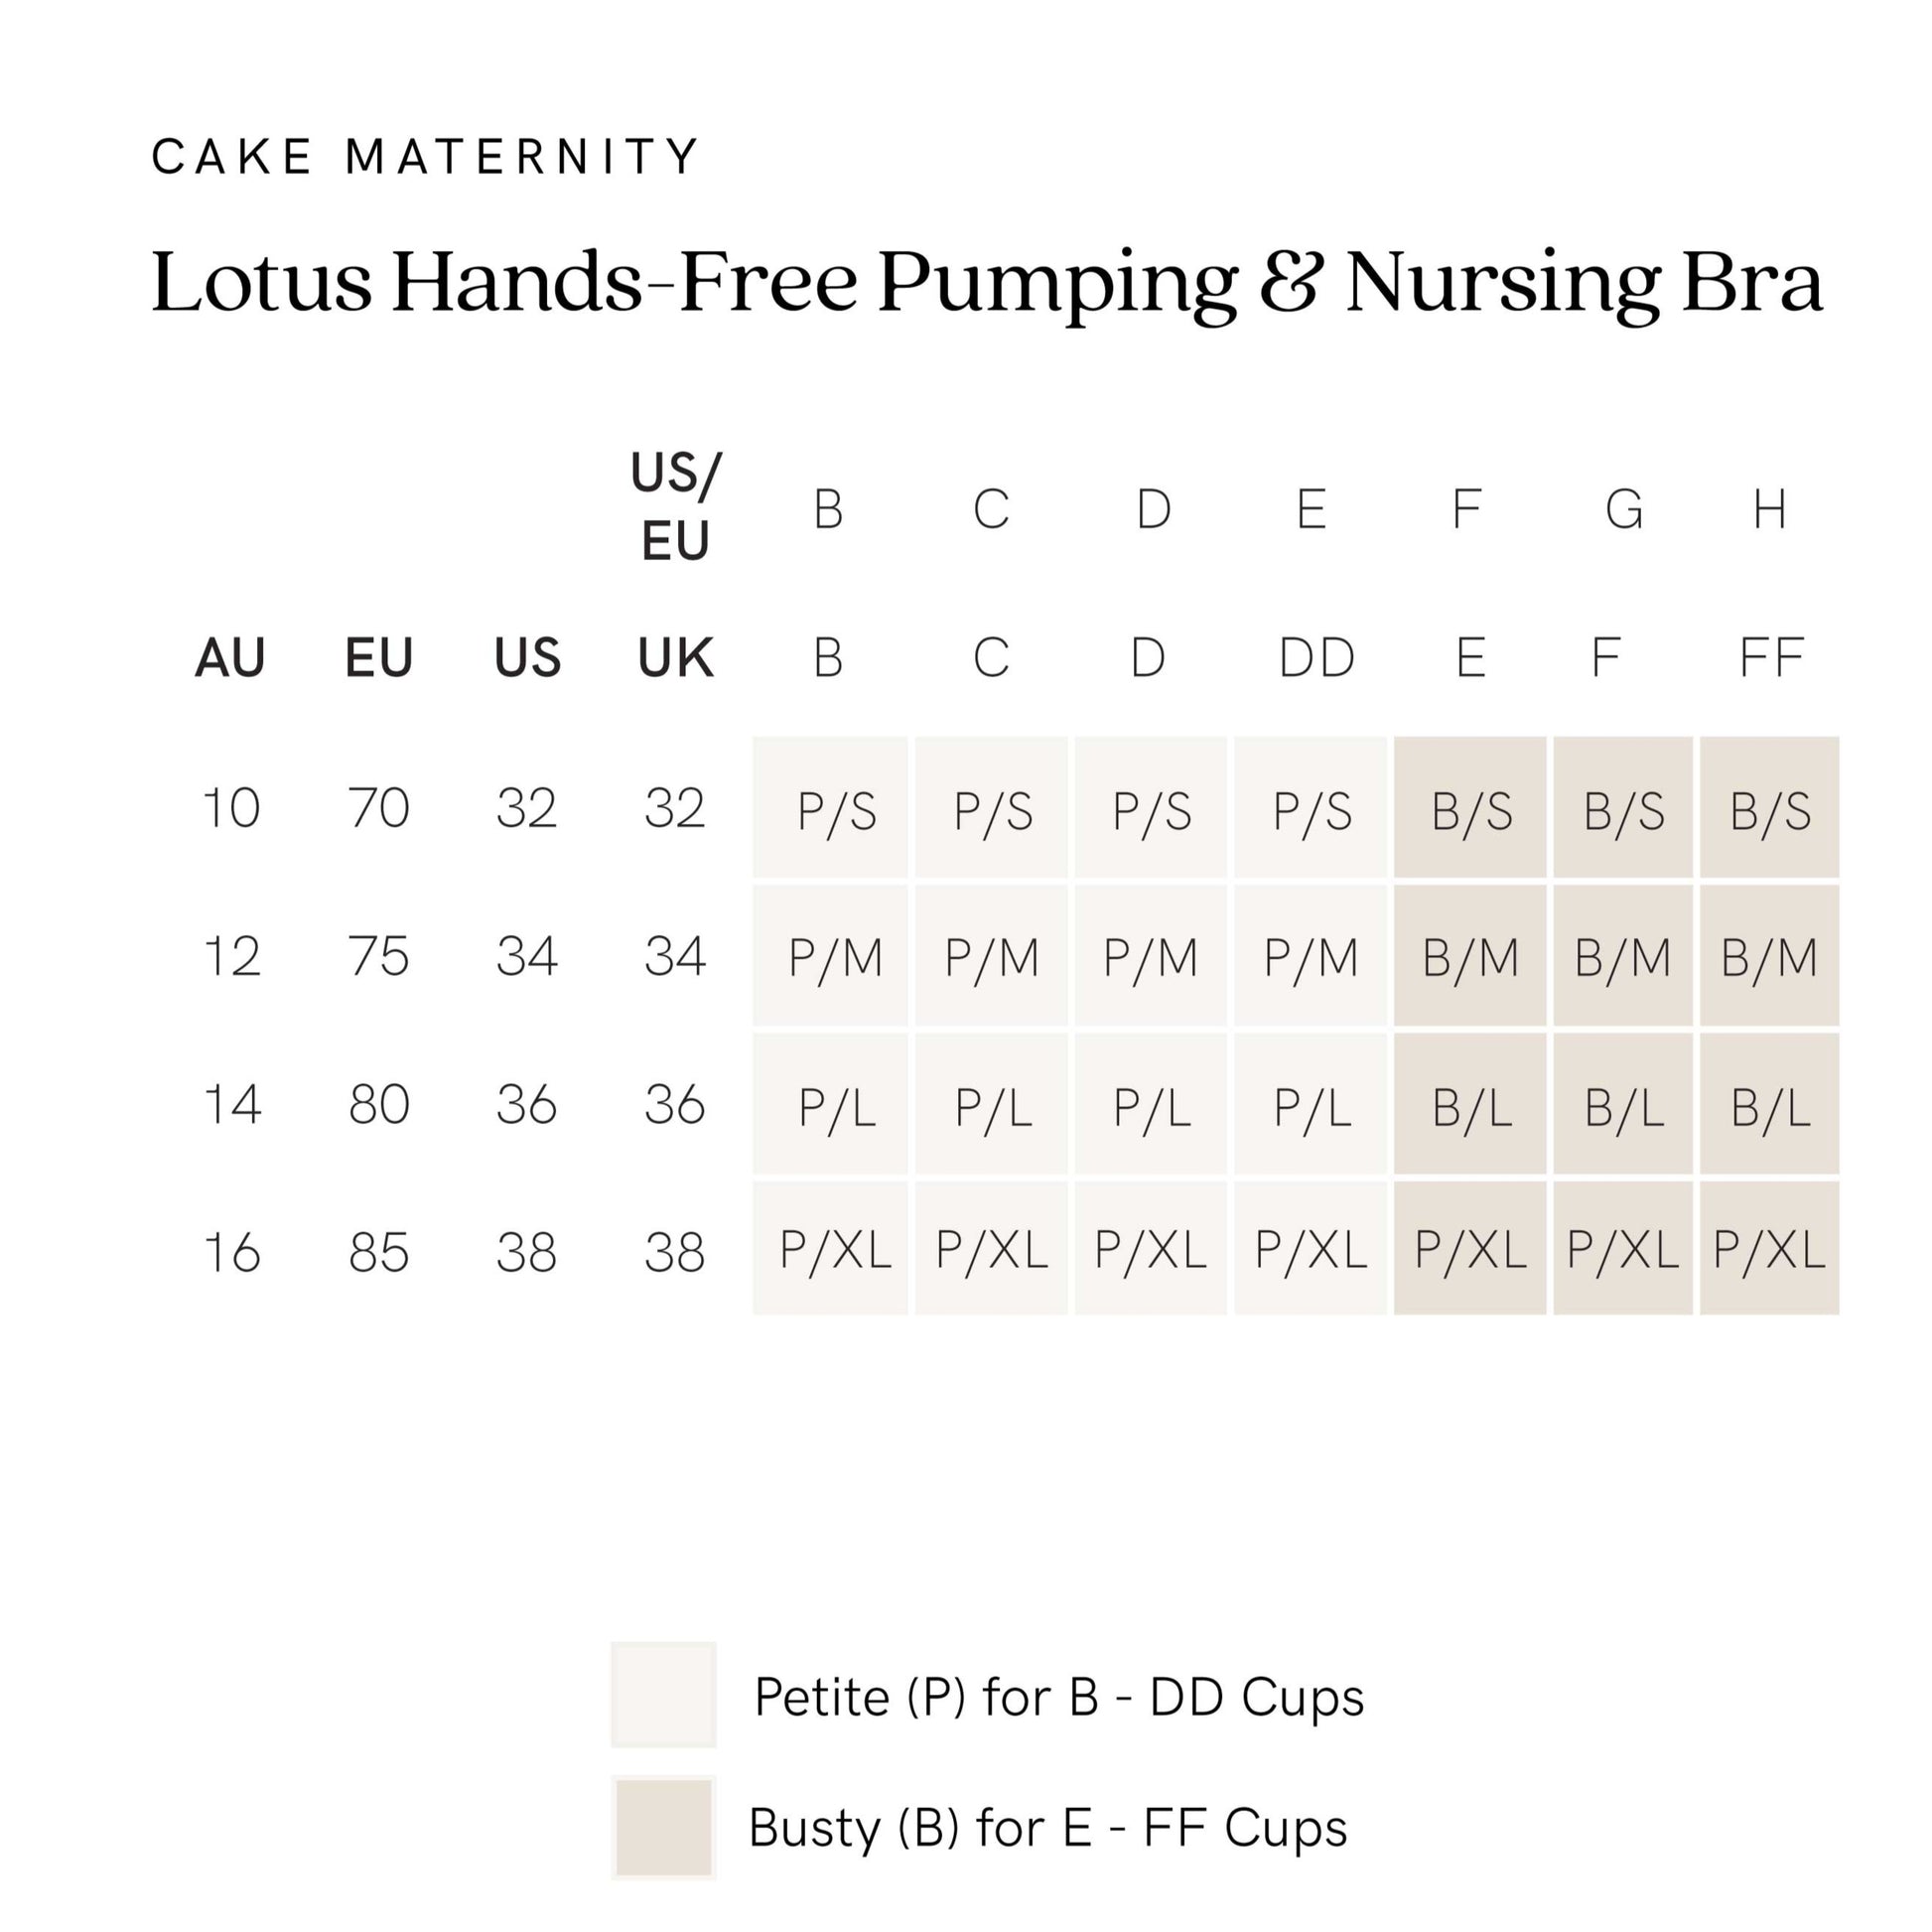 Best Deal for Cake Maternity Lotus Pumping Bra Hands Free, Maternity